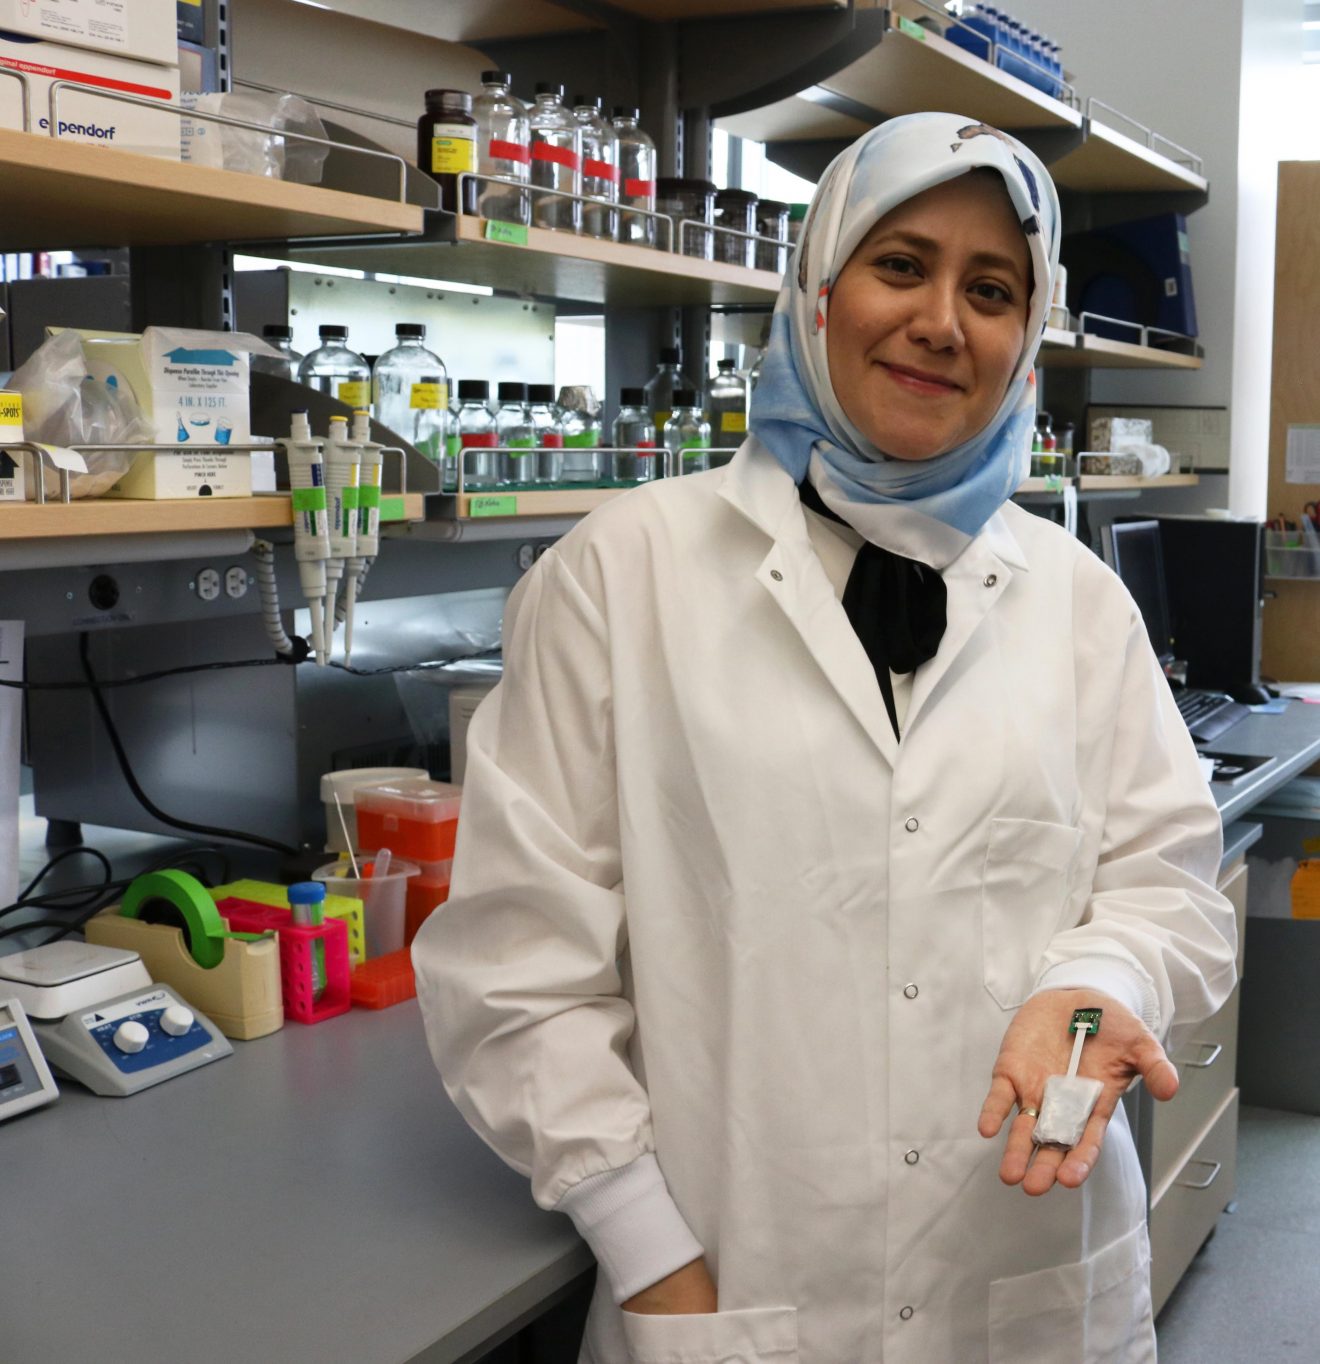 Photo of a woman in a lab coat, standing in a lab, holding a small device in her hand.